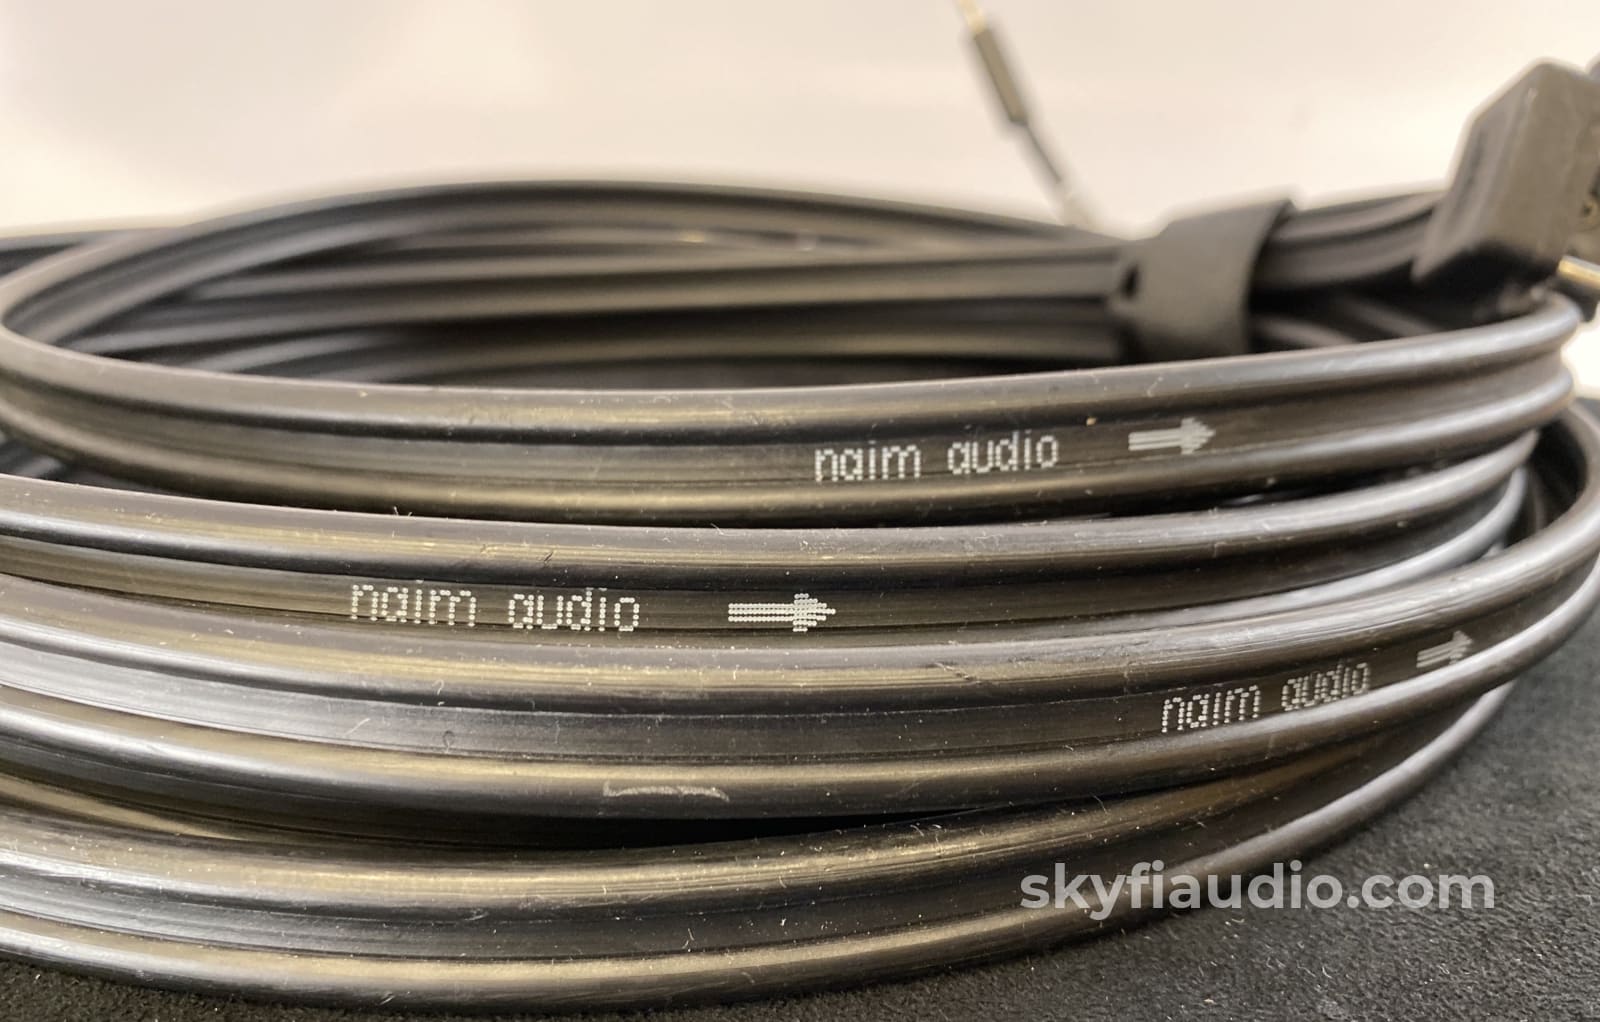 Naim Audio Nac A5 Speaker Cables With Connectors - 12